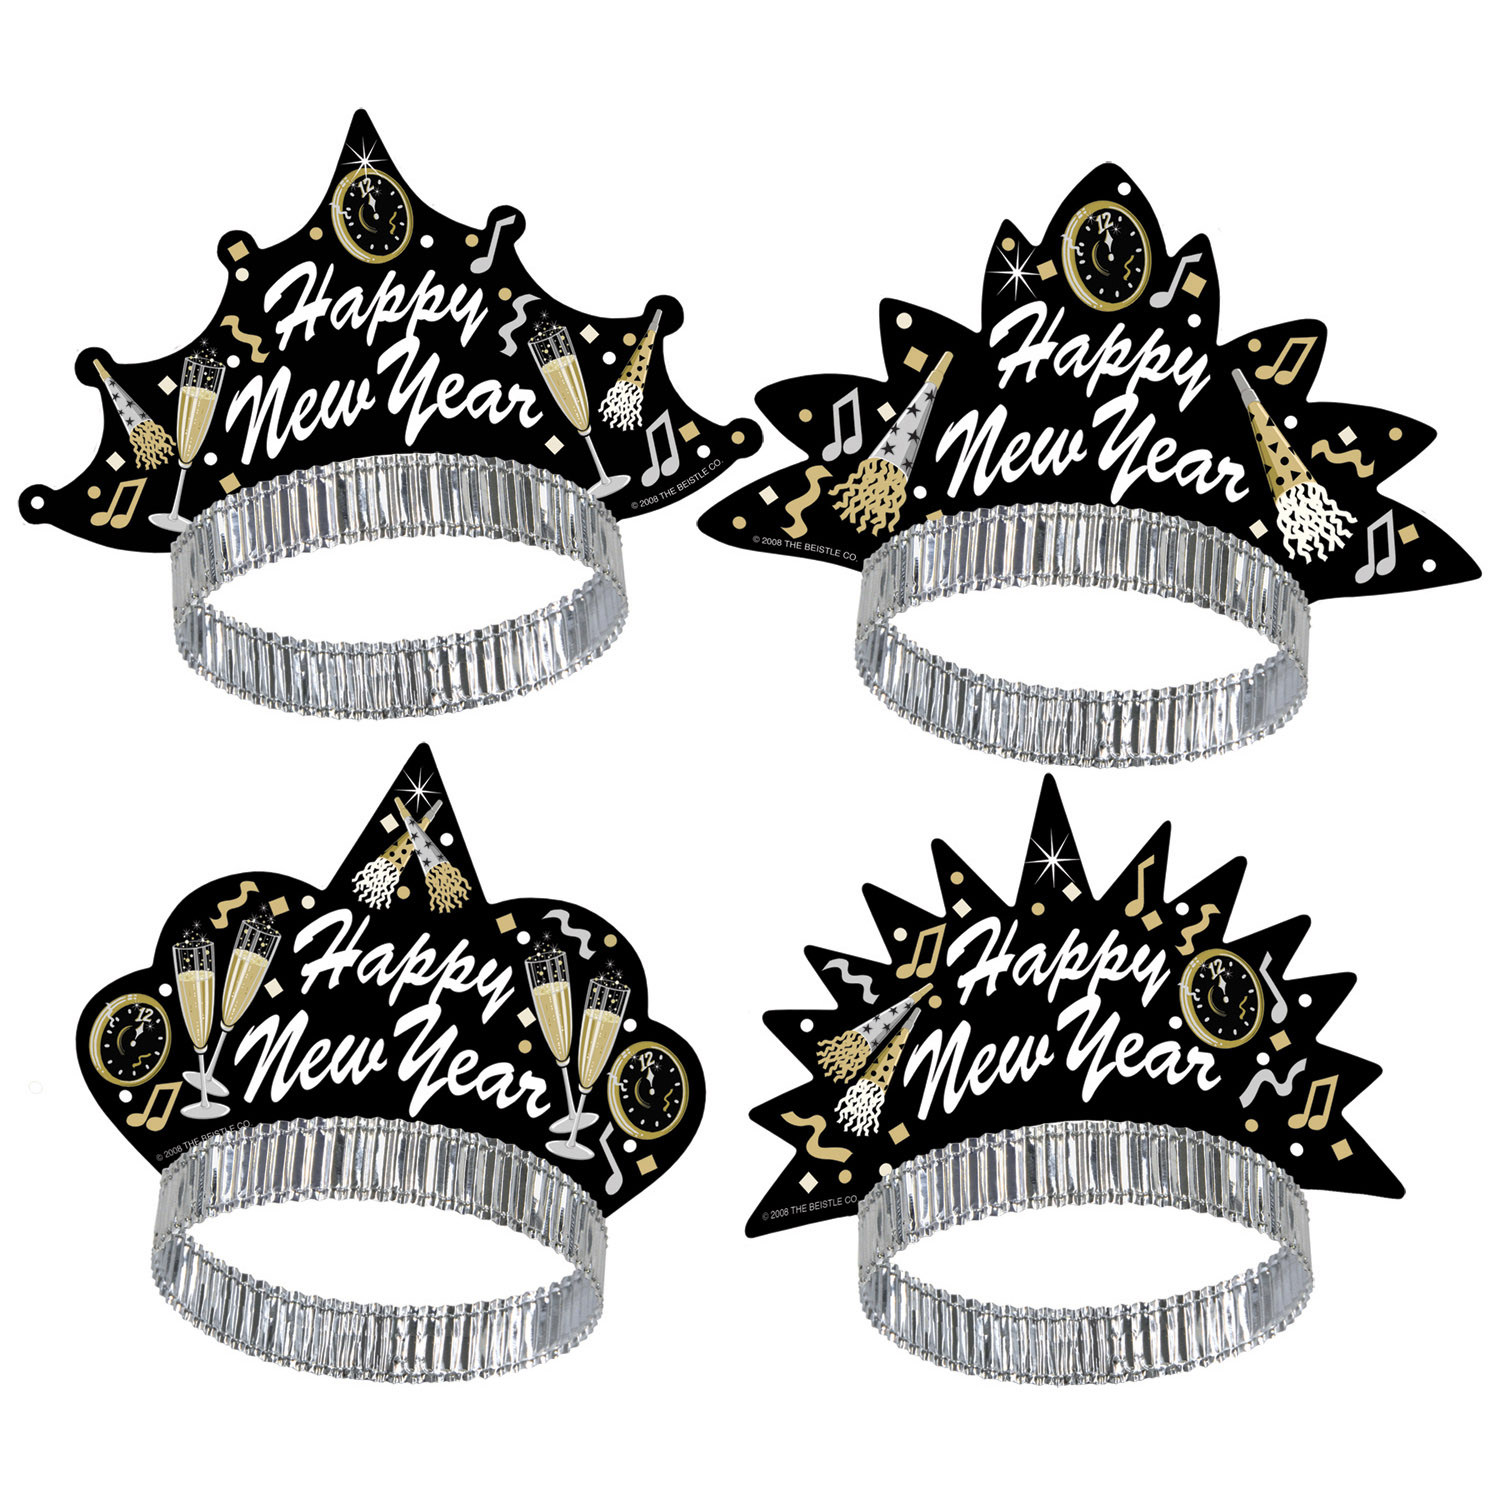 new years eve tiaras with champagne glasses, clocks, and horns printed on them